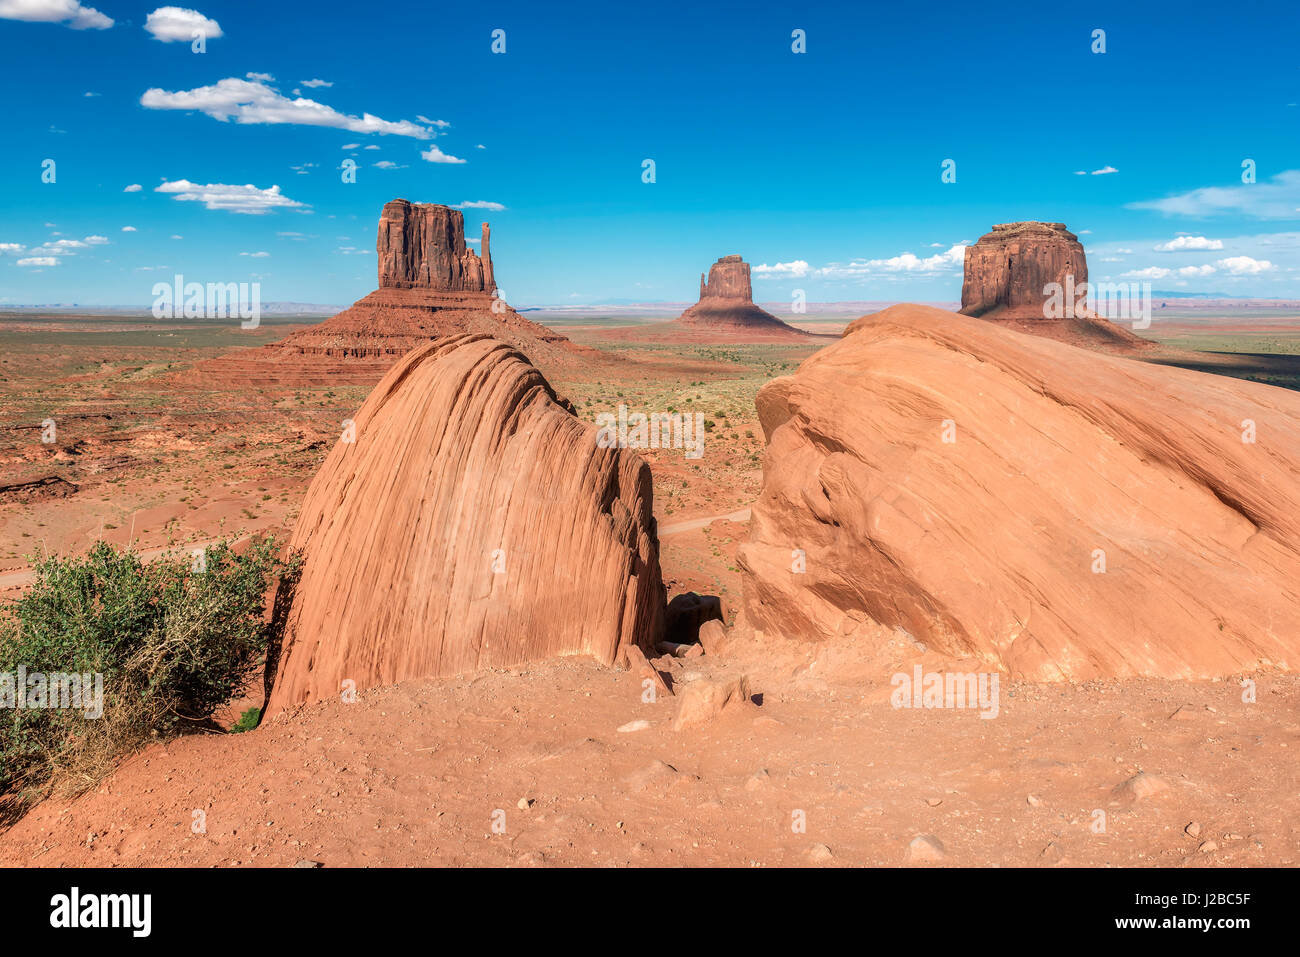 A classic view of the Monument Valley, Arizona Stock Photo